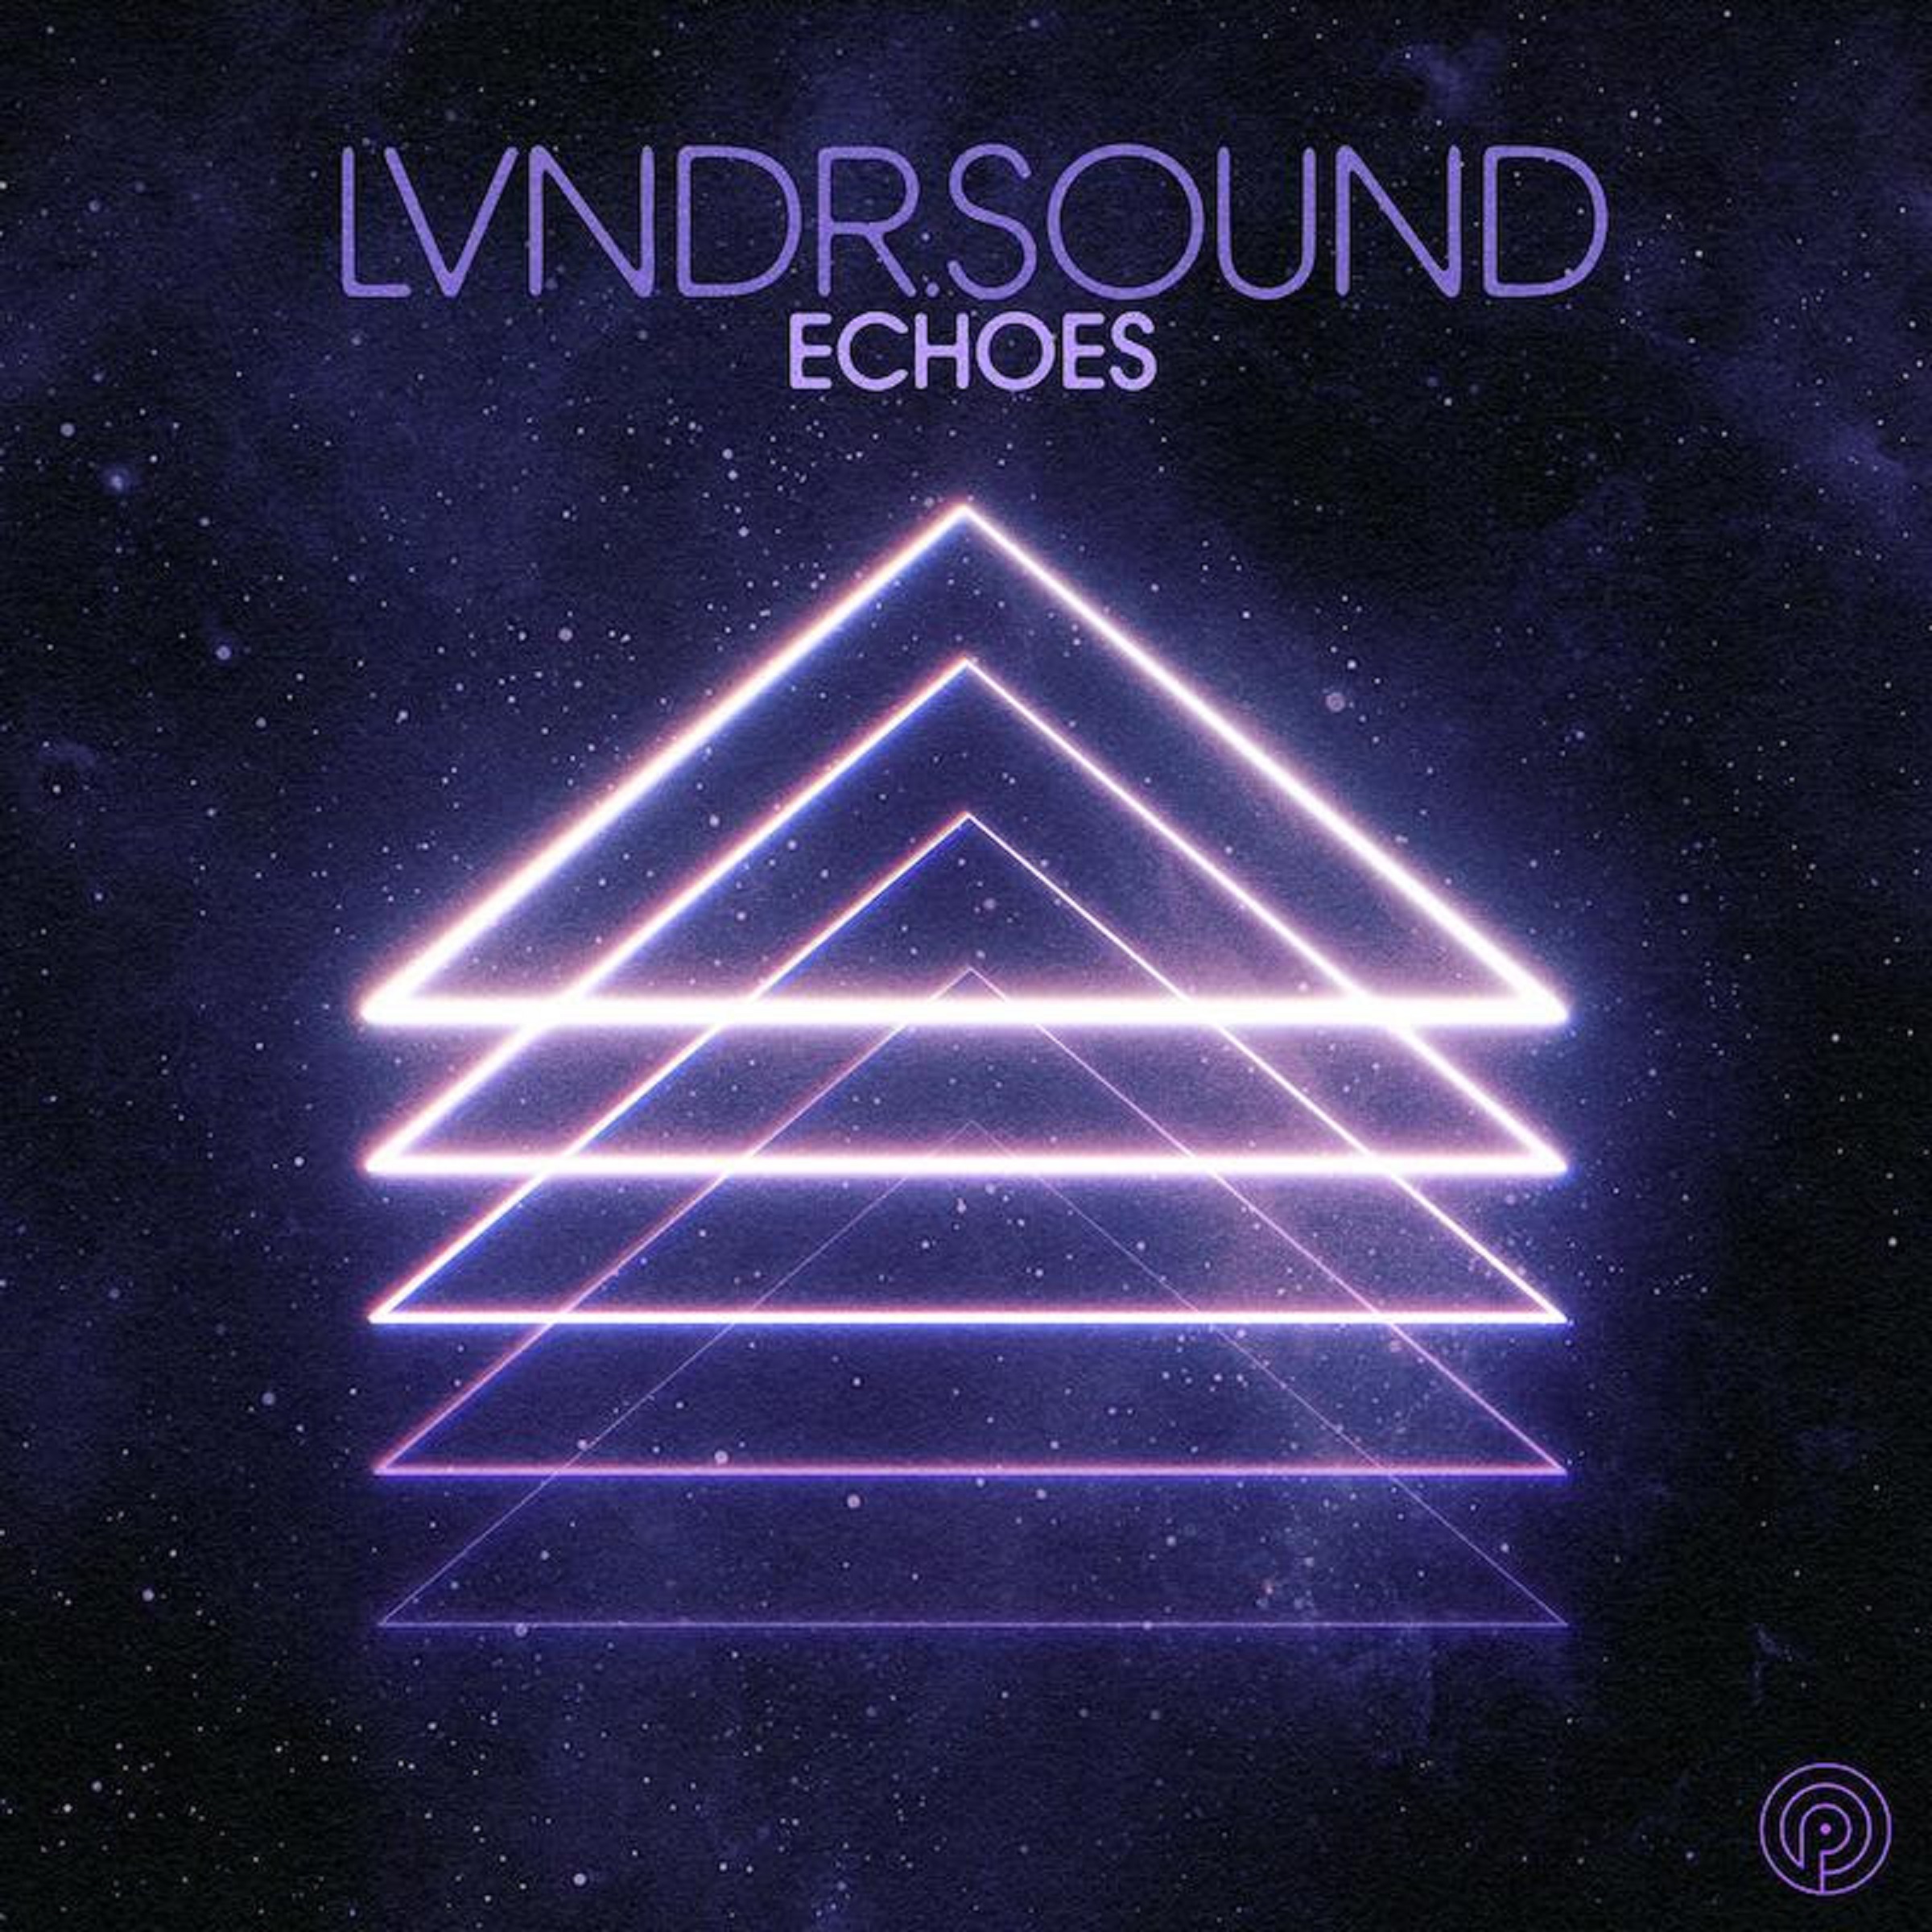 LVNDR.SOUND, who has collaborated with members of Lettuce drop future house single "Echoes"